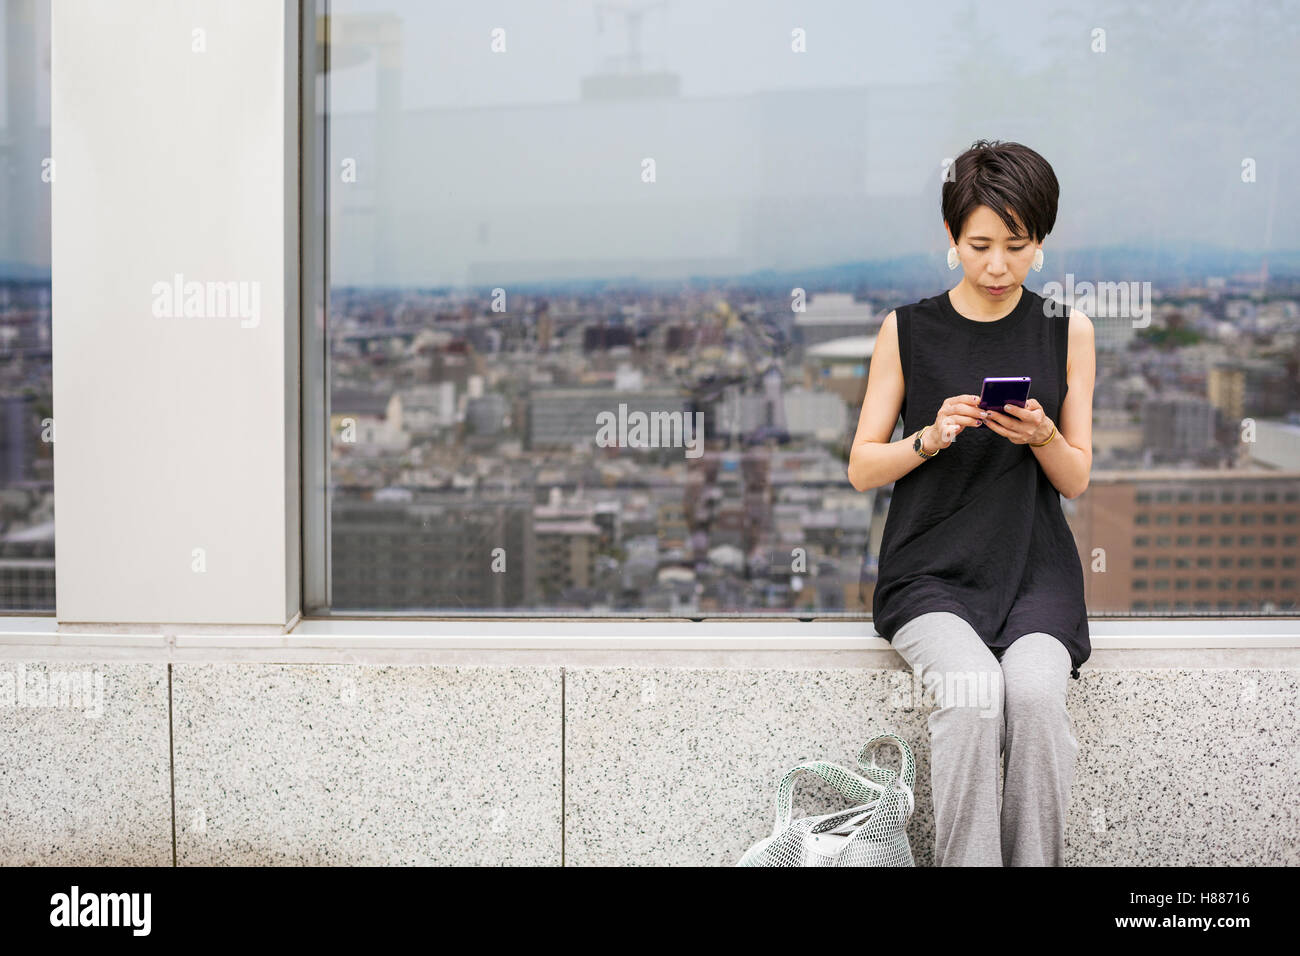 A woman seated by a window with a view over a large city with her back to the view, using her smart phone. Stock Photo